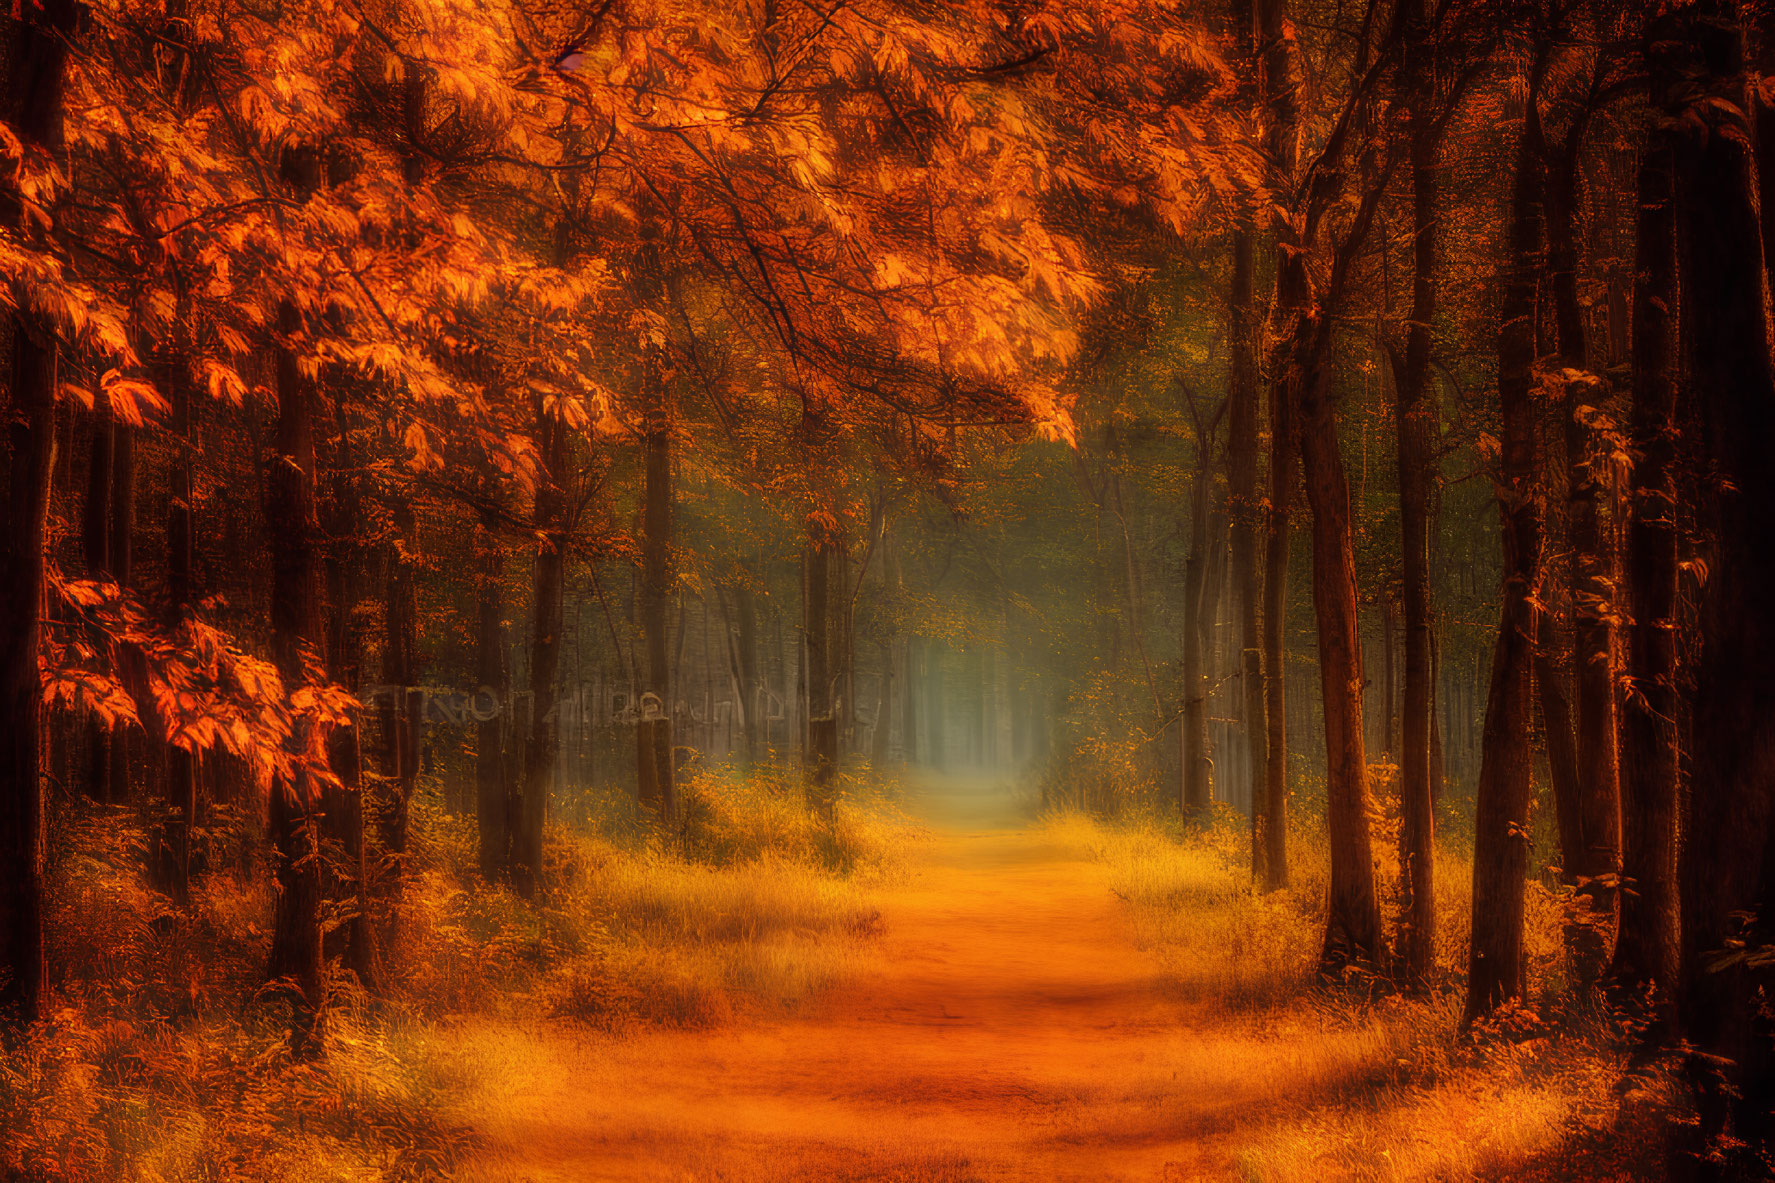 Autumn forest path with vibrant orange leaves and soft glowing light